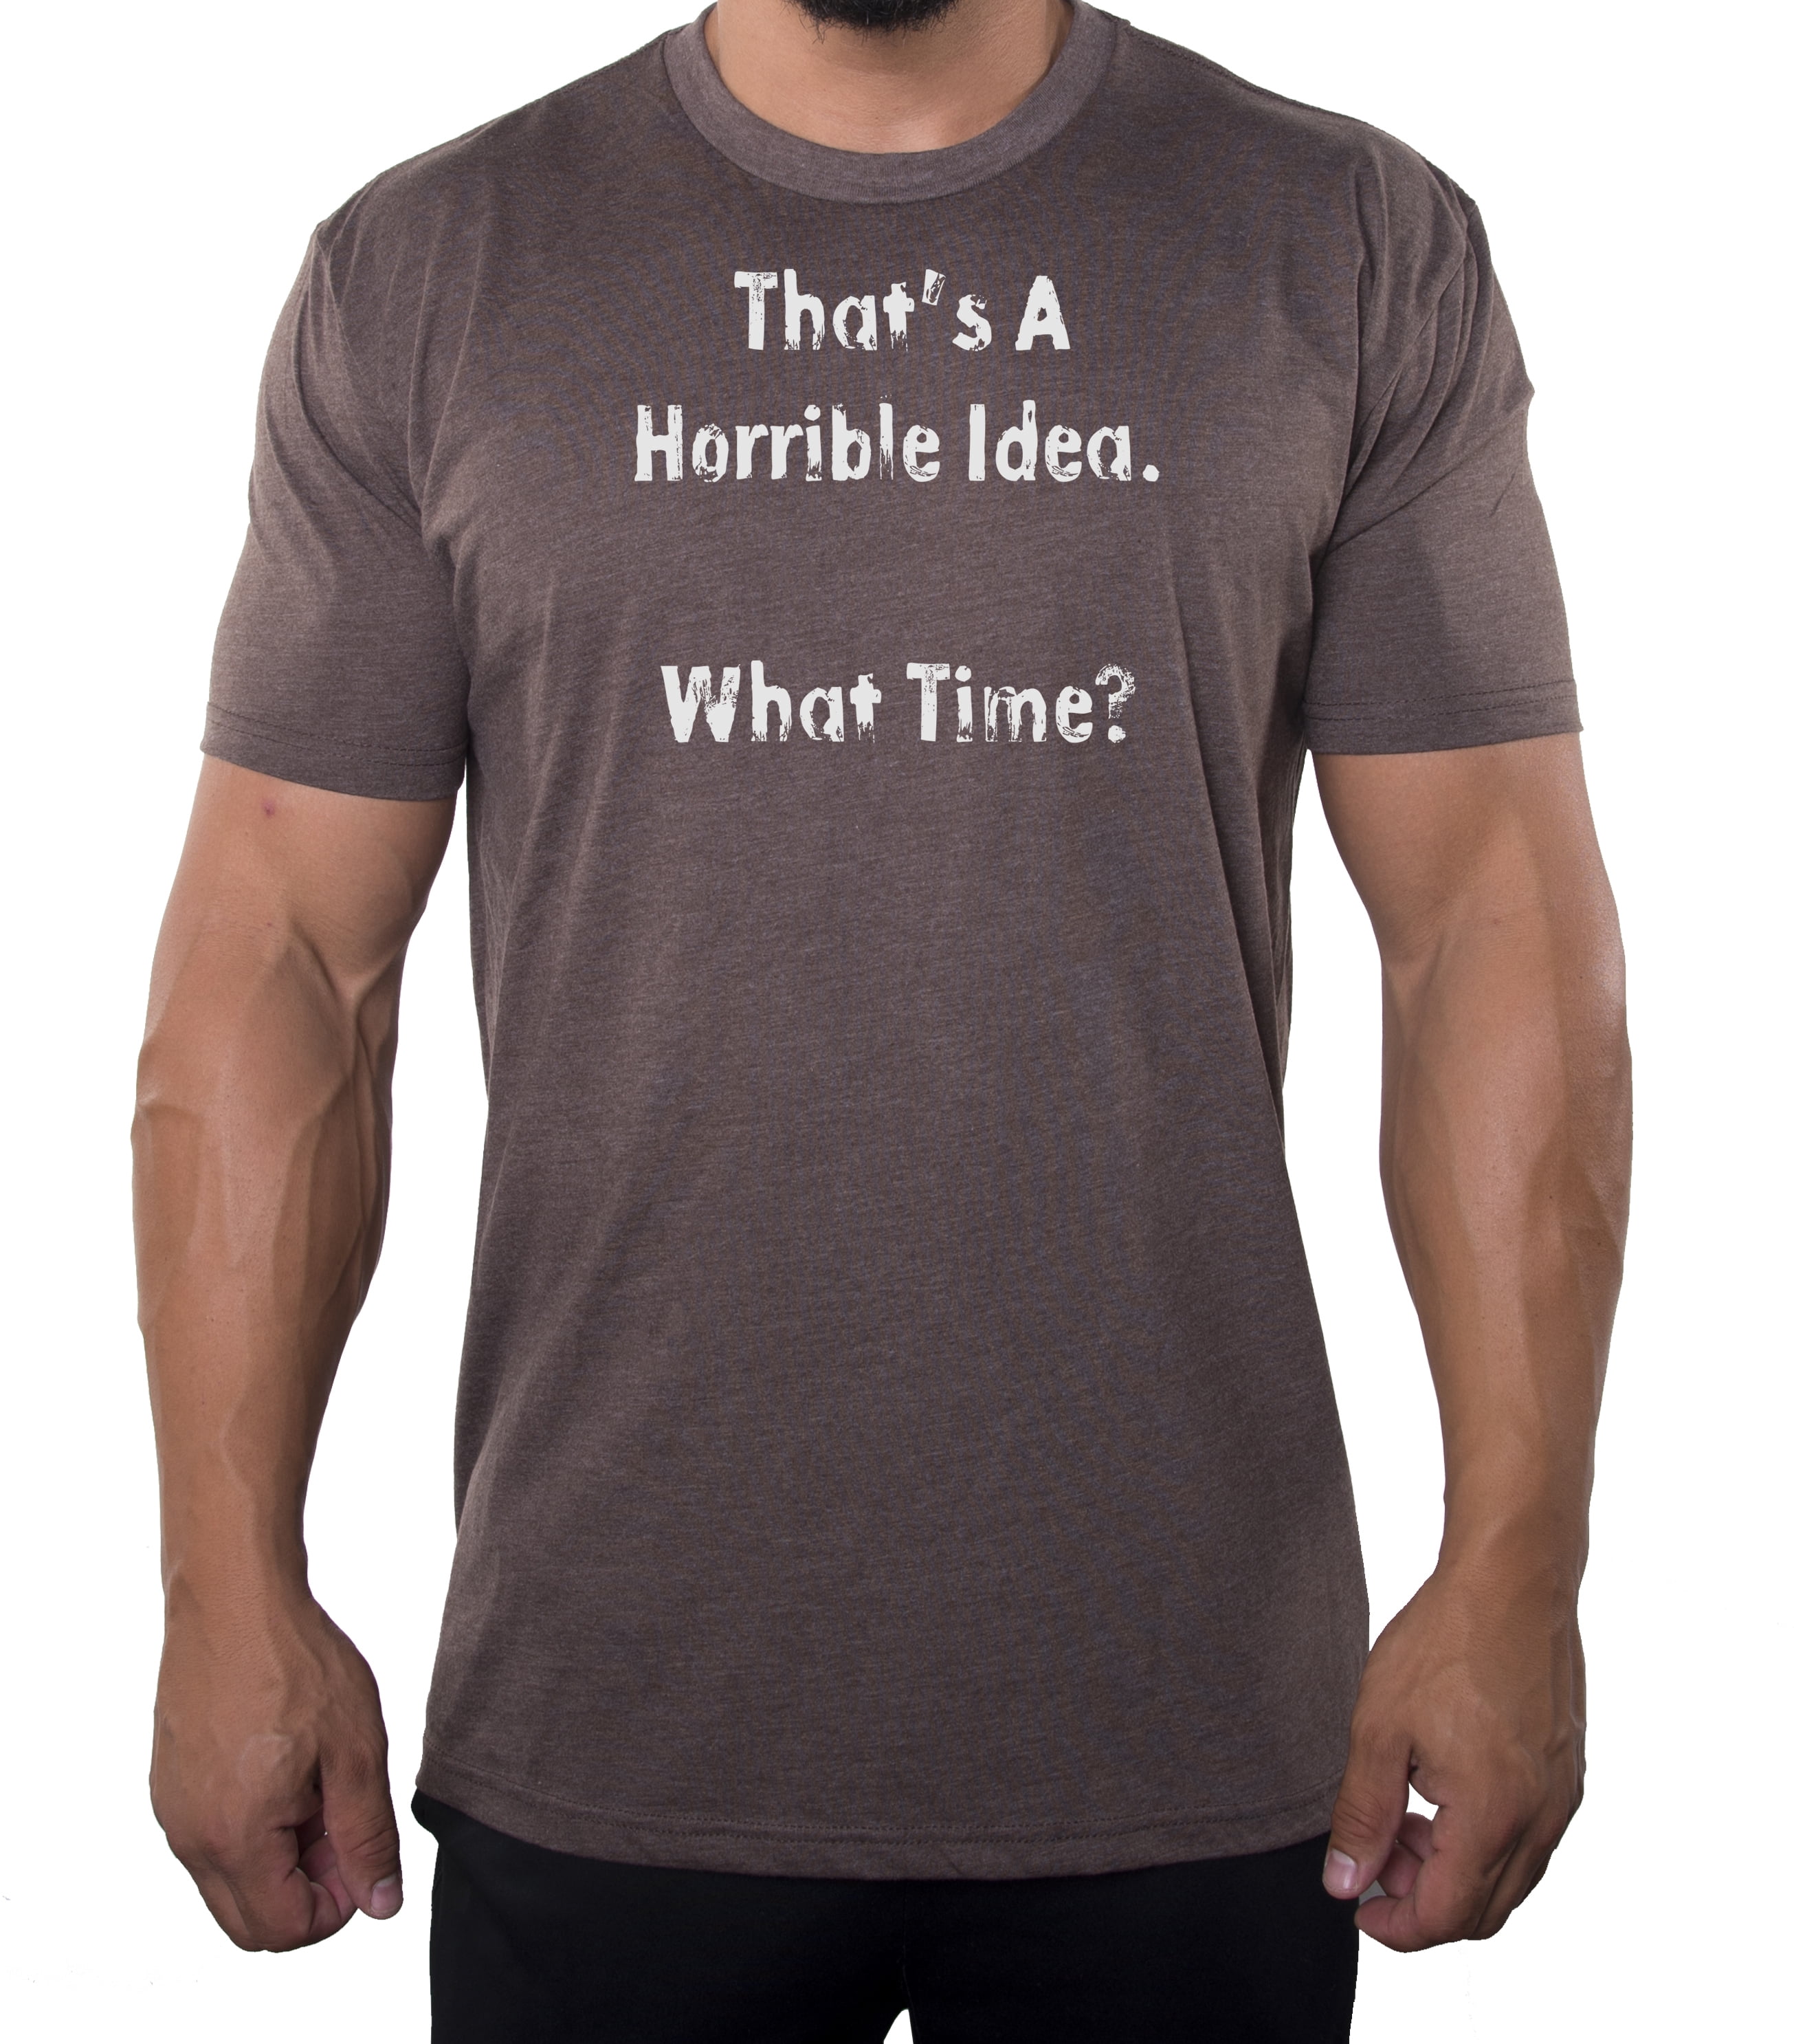 Thats a Horrible Idea What Time T-Shirt Funny Sarcastic Drinking Humor Men/'s T Shirt